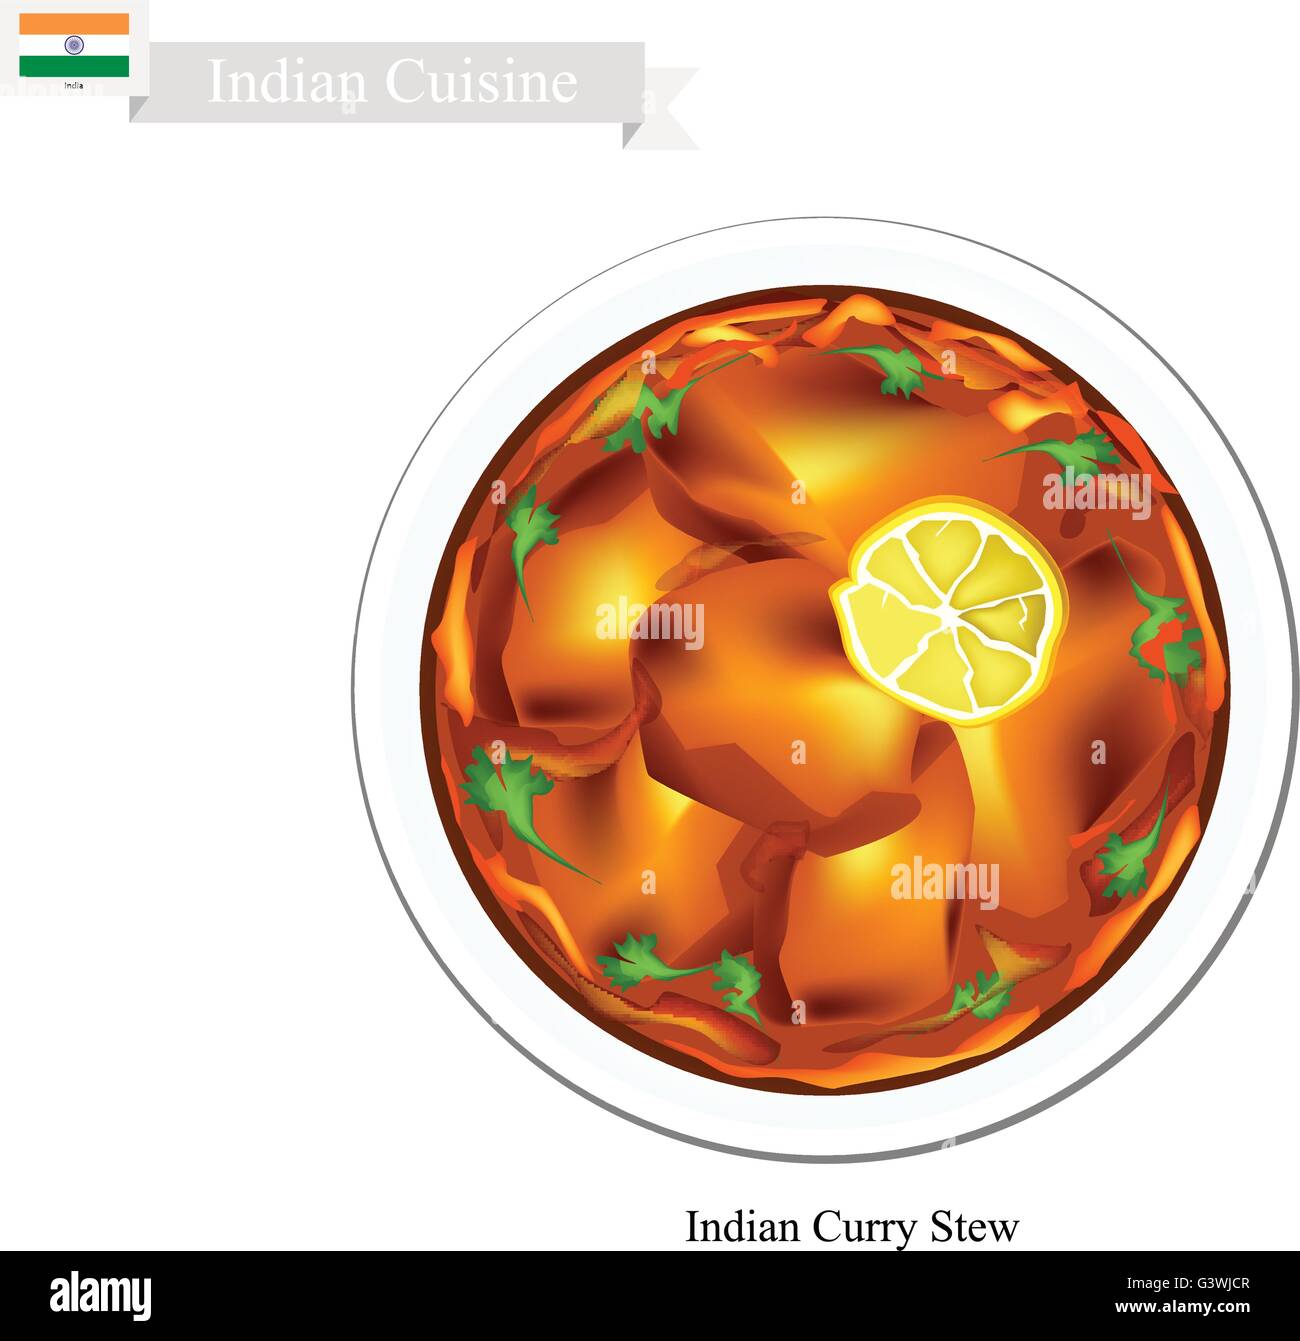 Indian Cuisine, Traditional Indian Curry Stew. One of The Most Popular Dish in India. Stock Vector